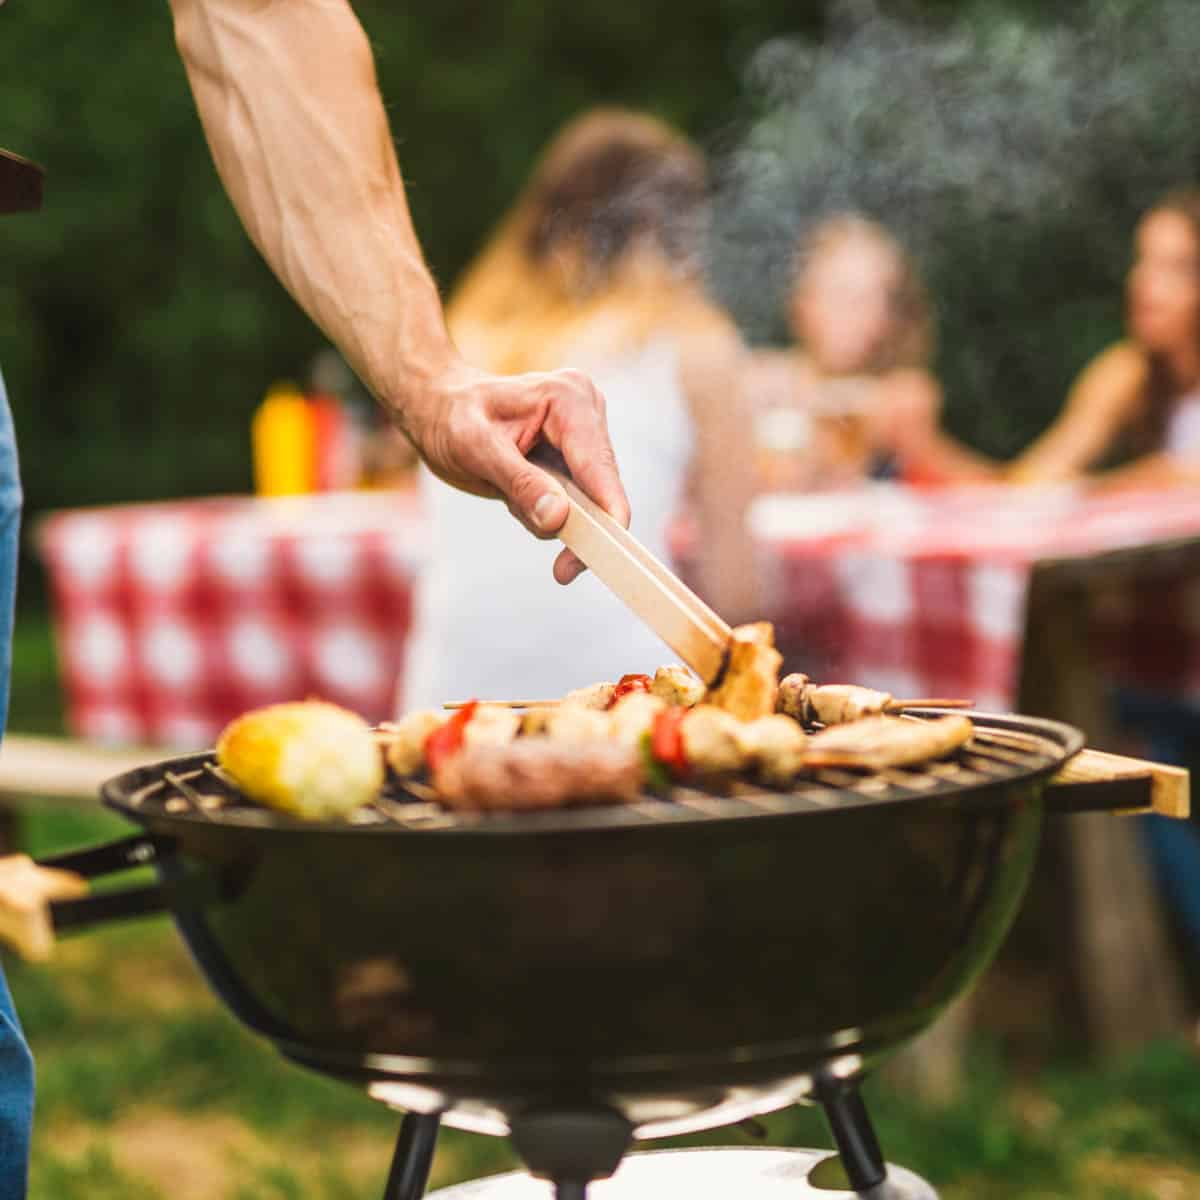 Man grilling on a charcoal grill with a a picnic table in the background